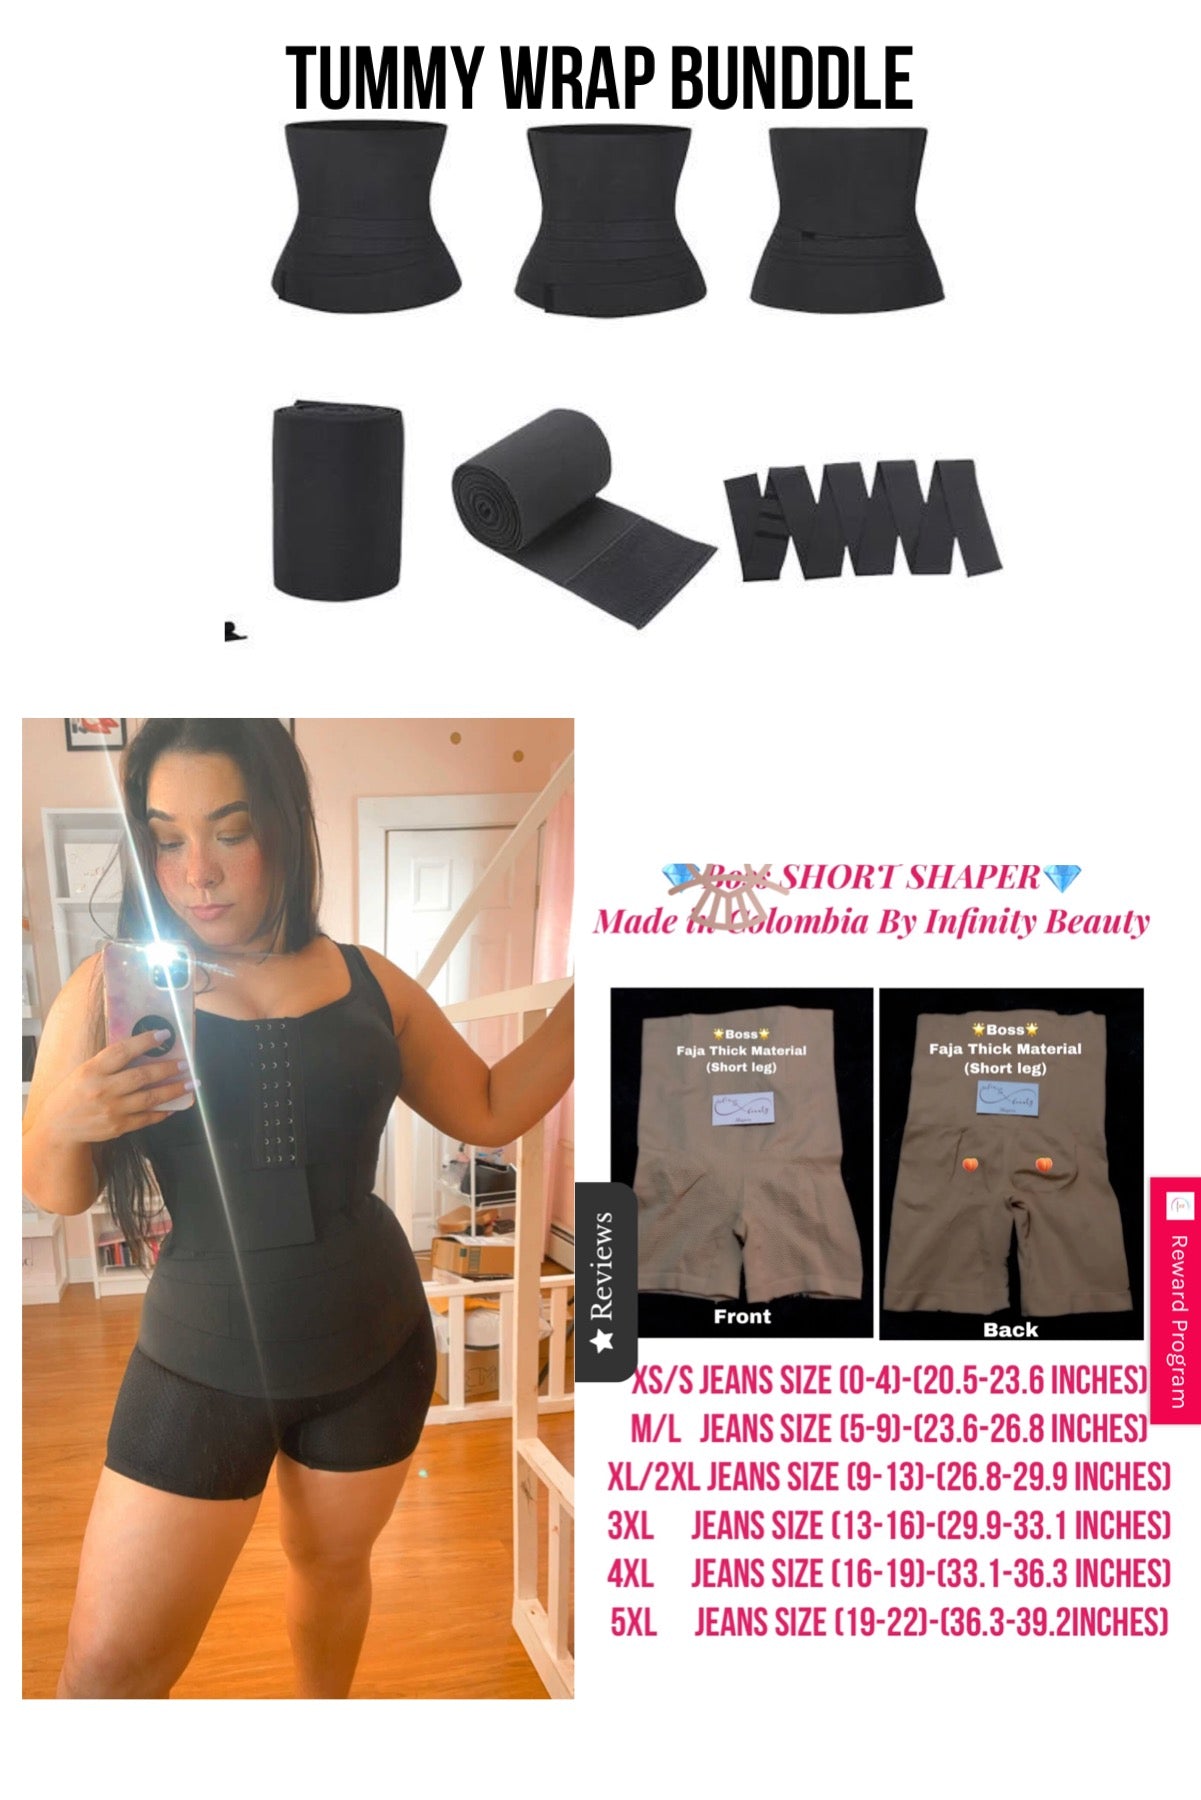 Tummy wrap size M fits up to size 18-XL + Boss Short color random